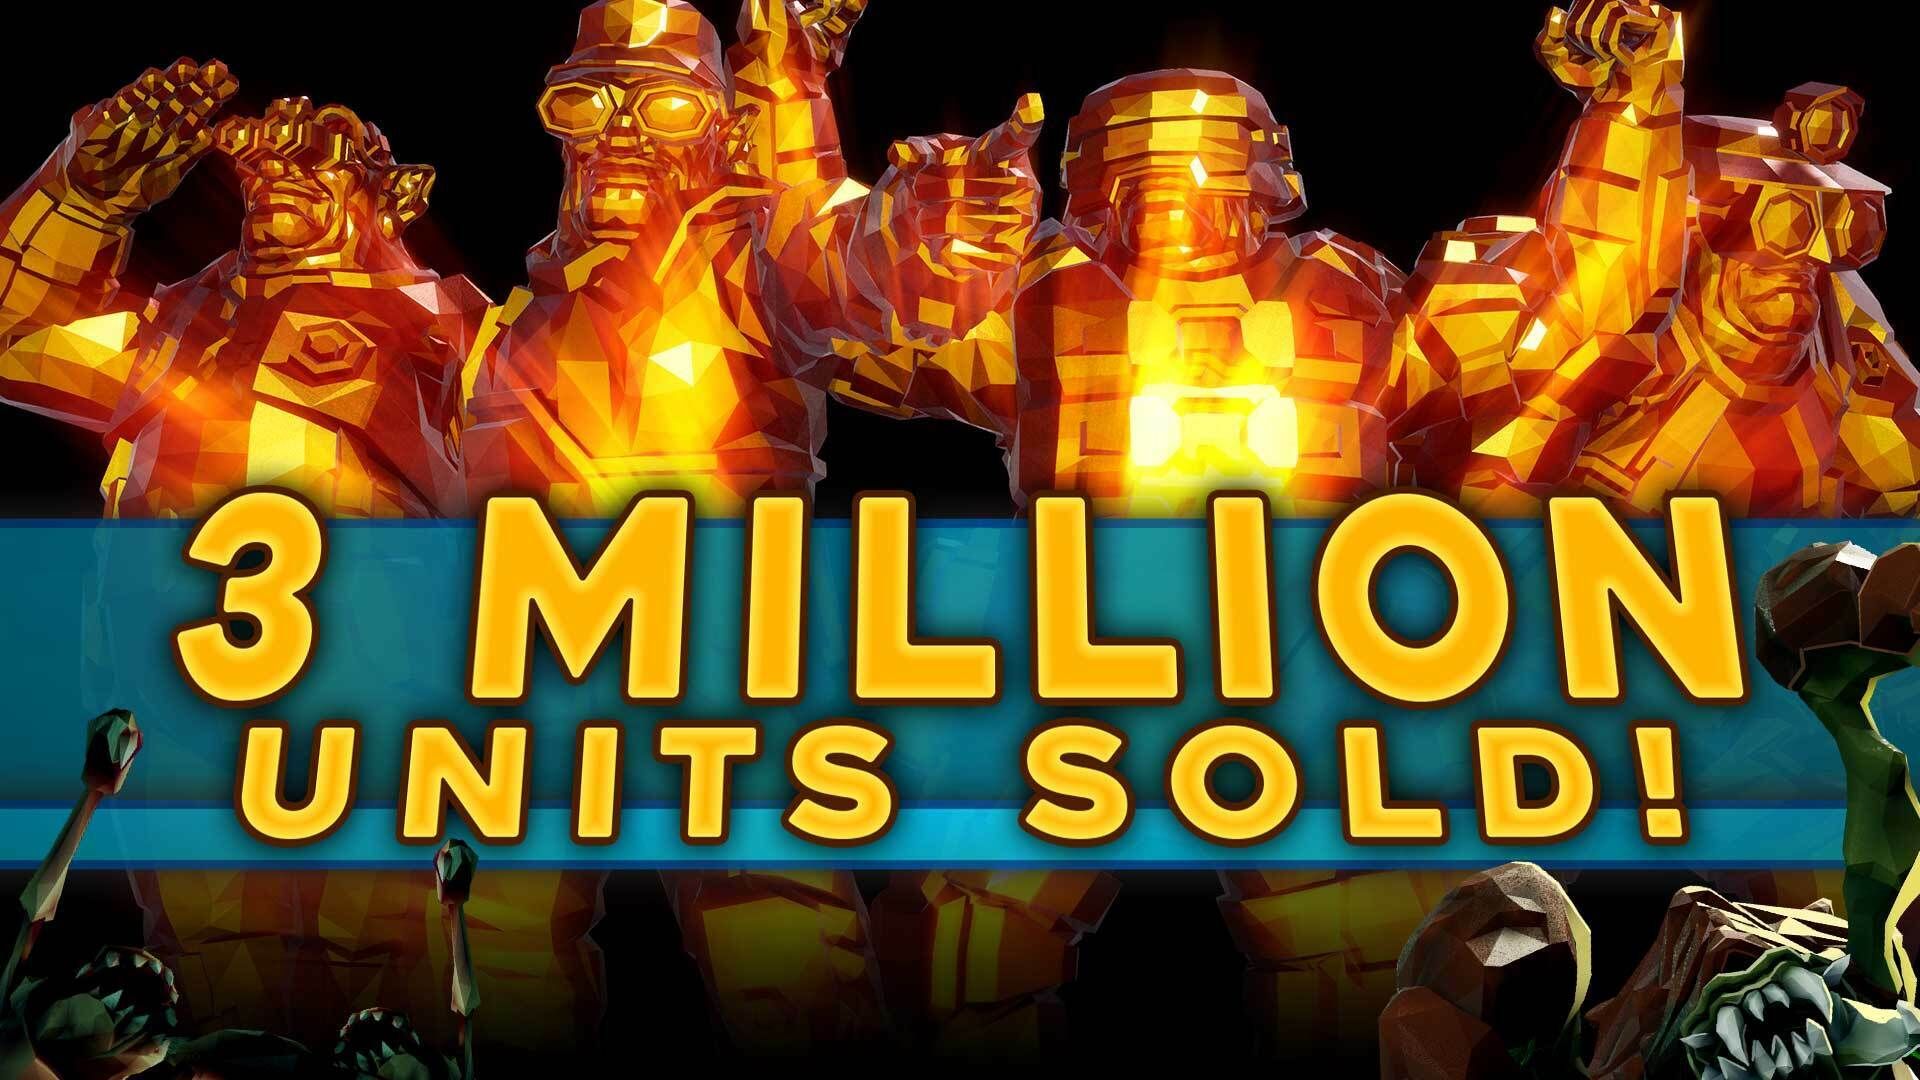 3 Million units sold - via Ghost Ship Games